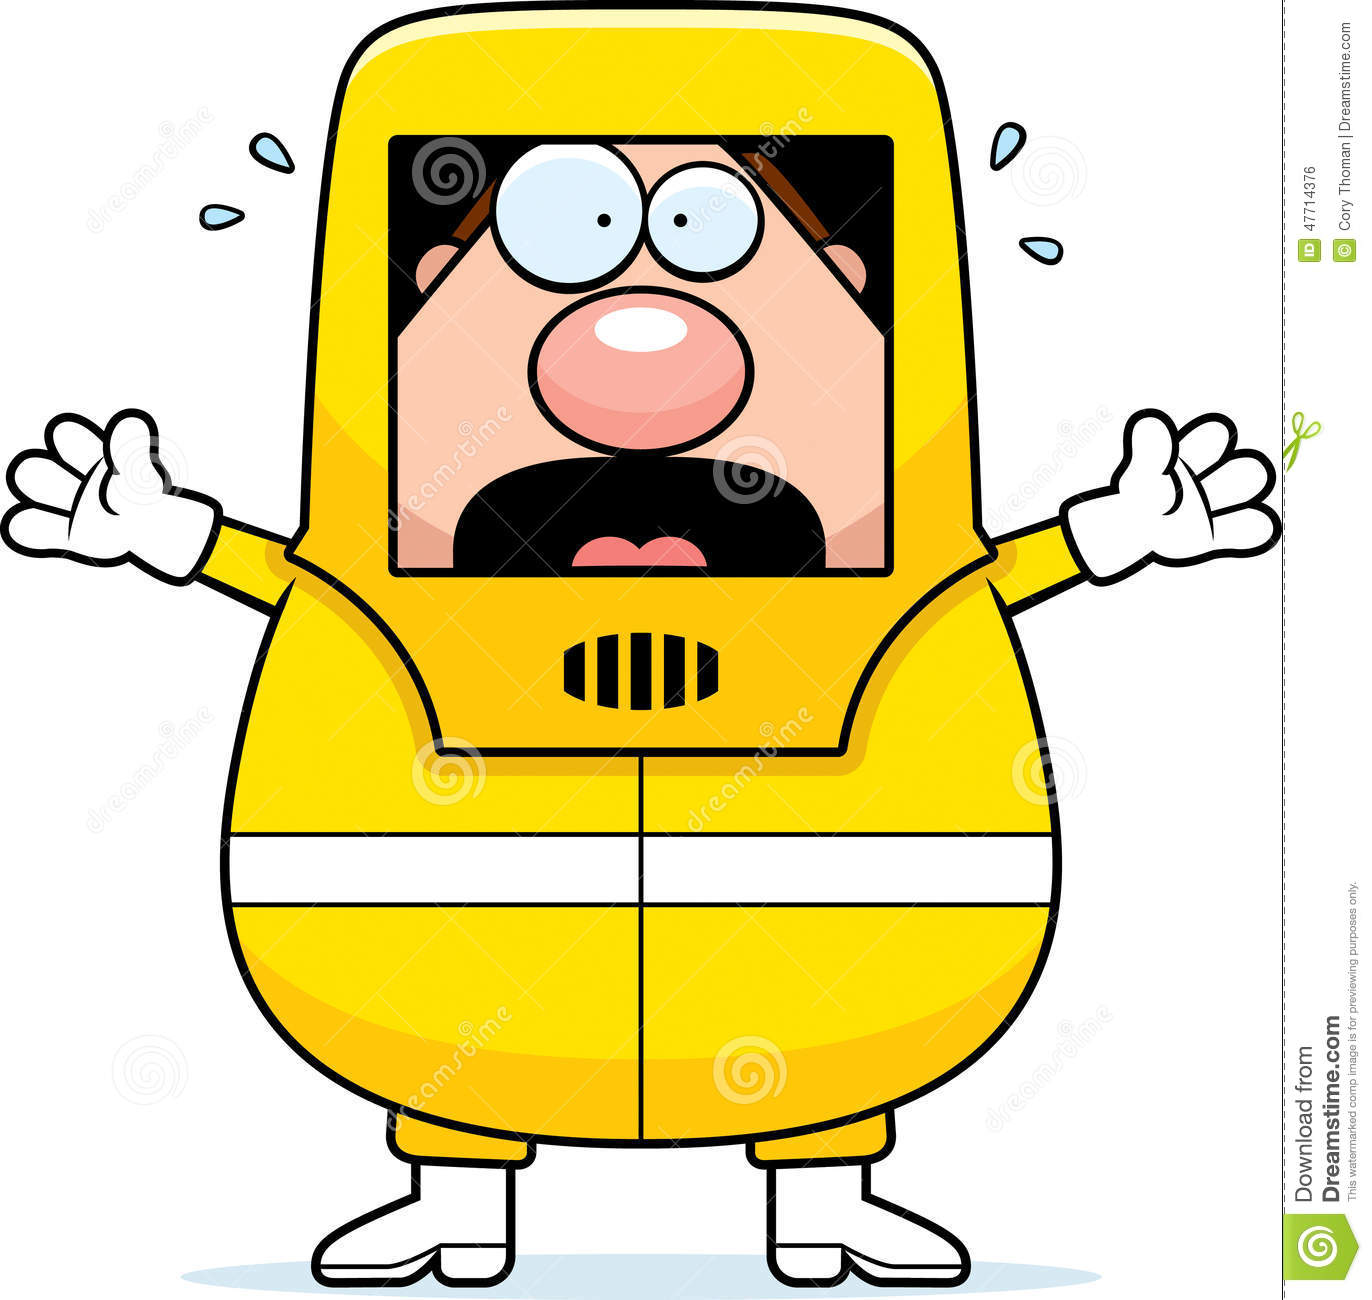 Cartoon Illustration Of A Man In A Hazmat Suit Looking Scared